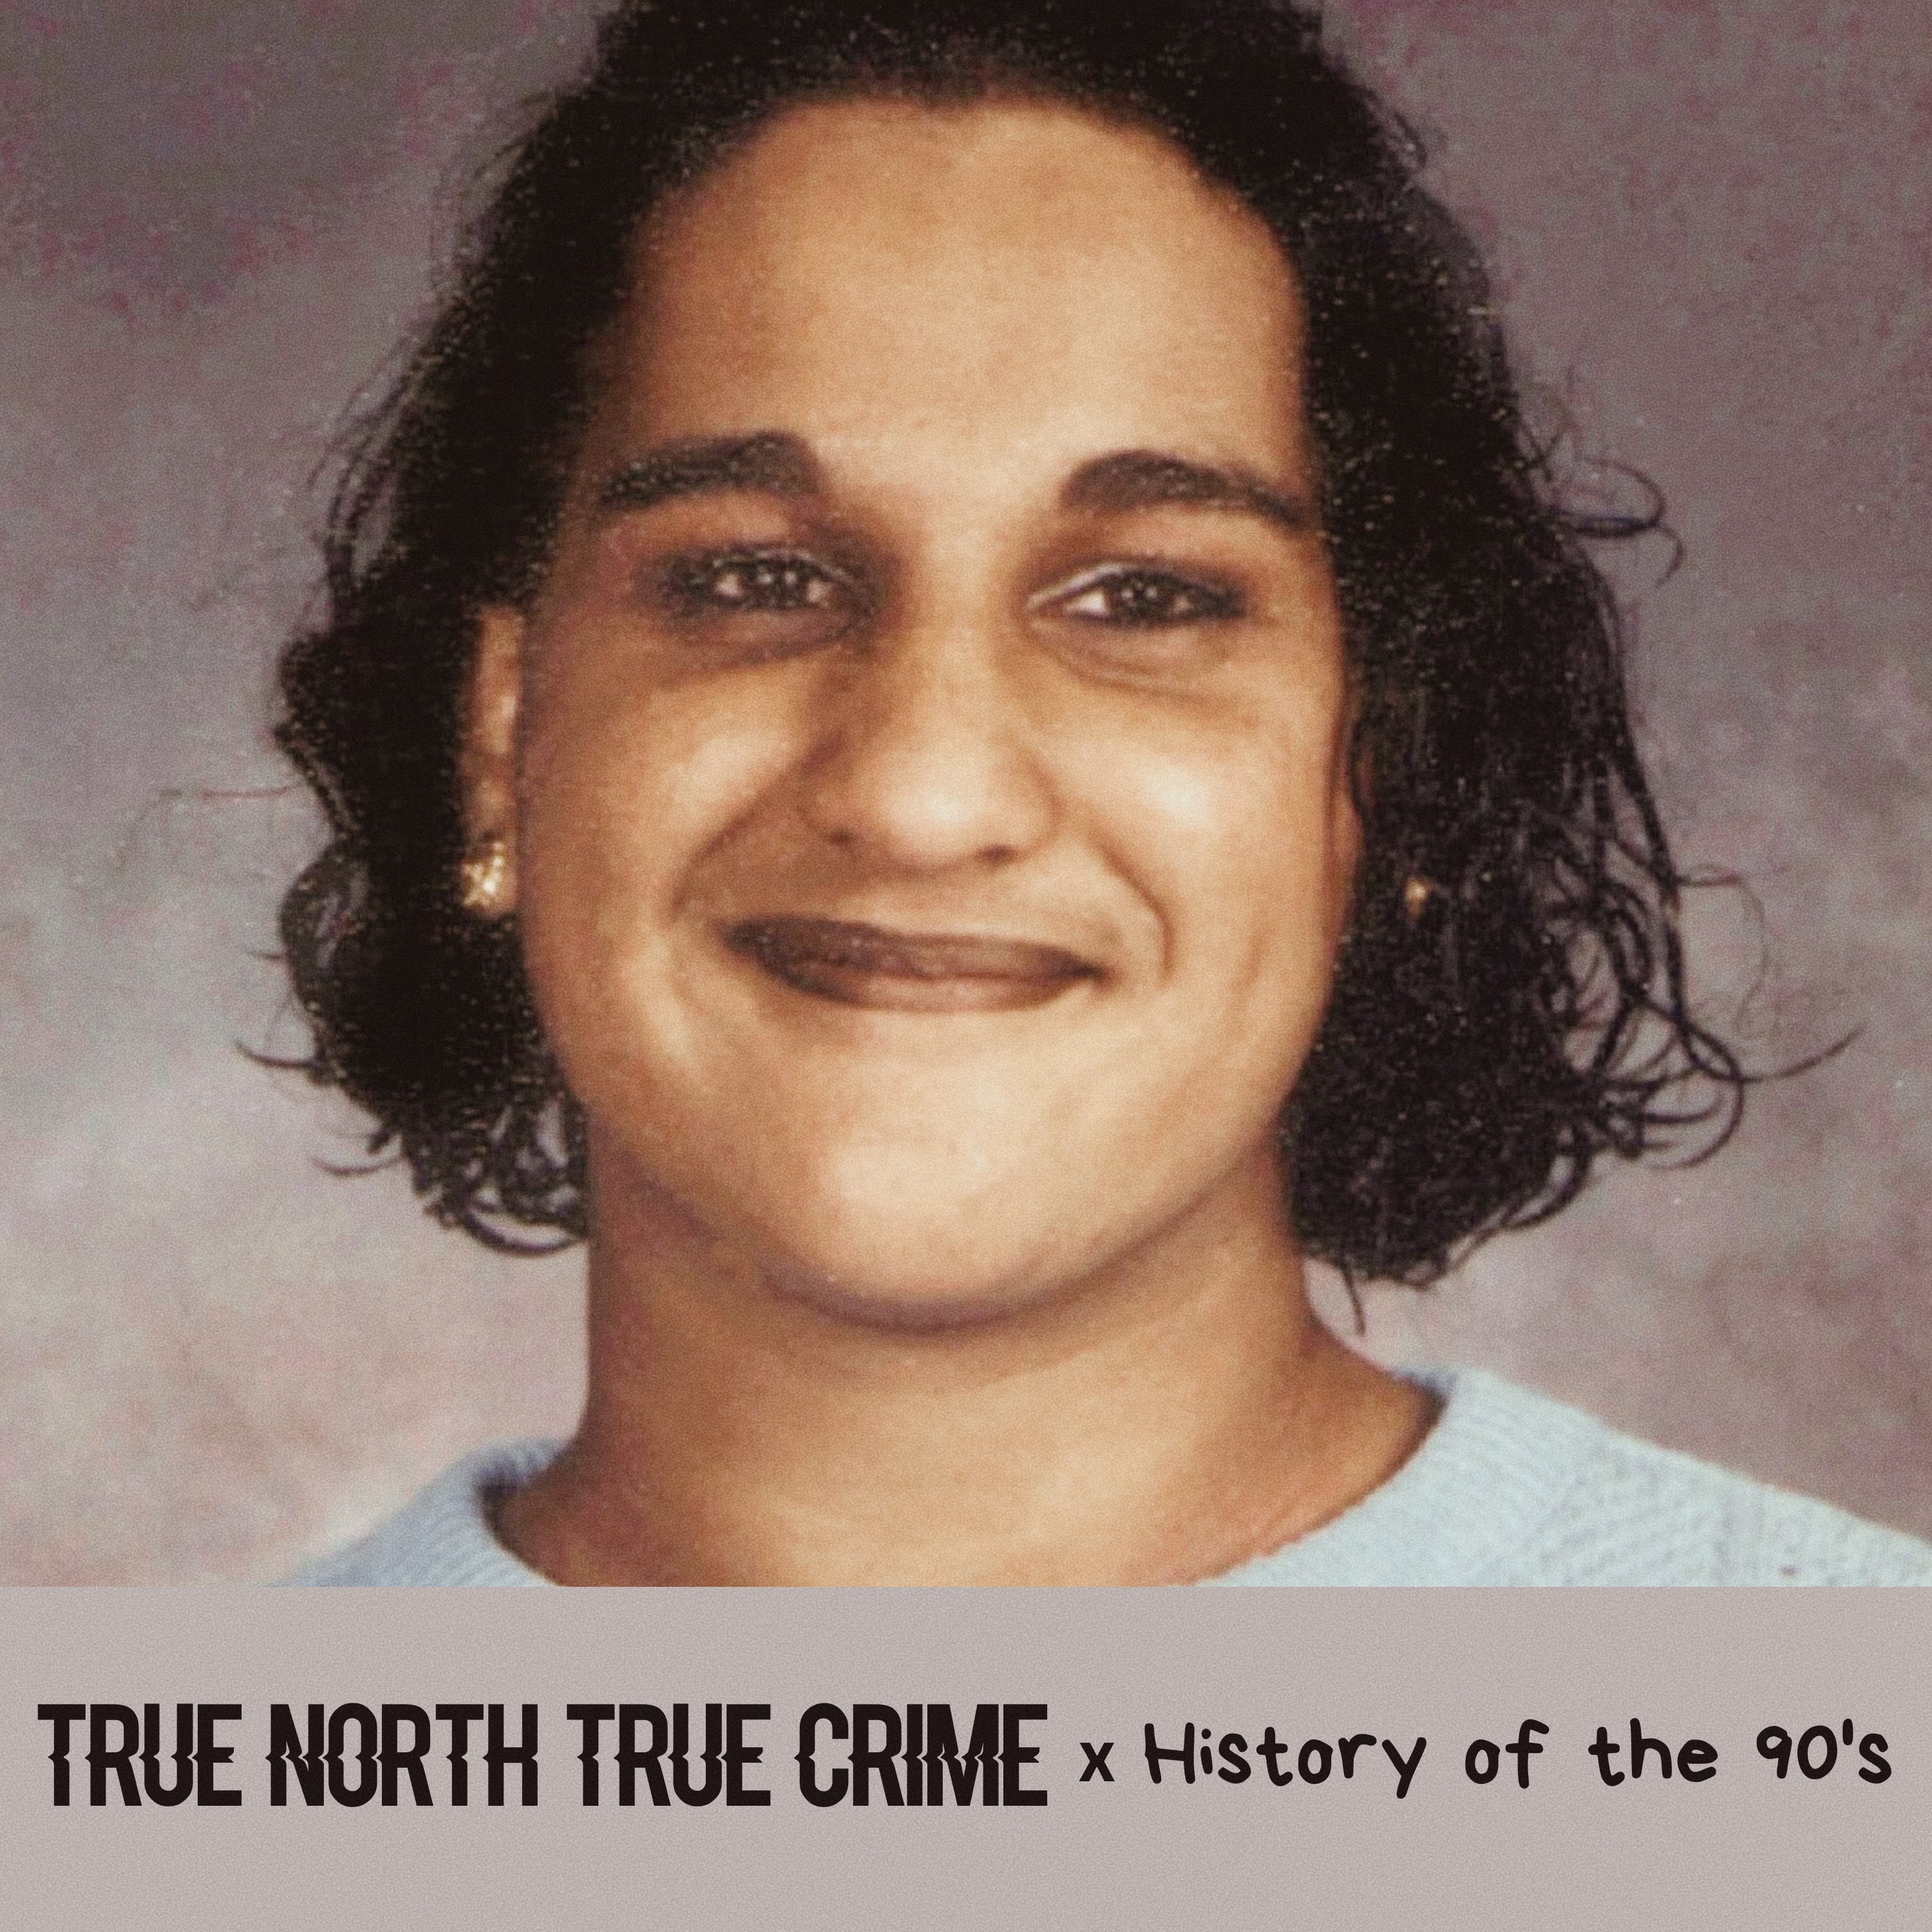 cover art for History of the 90s x True North True Crime - Reena Virk Part 1